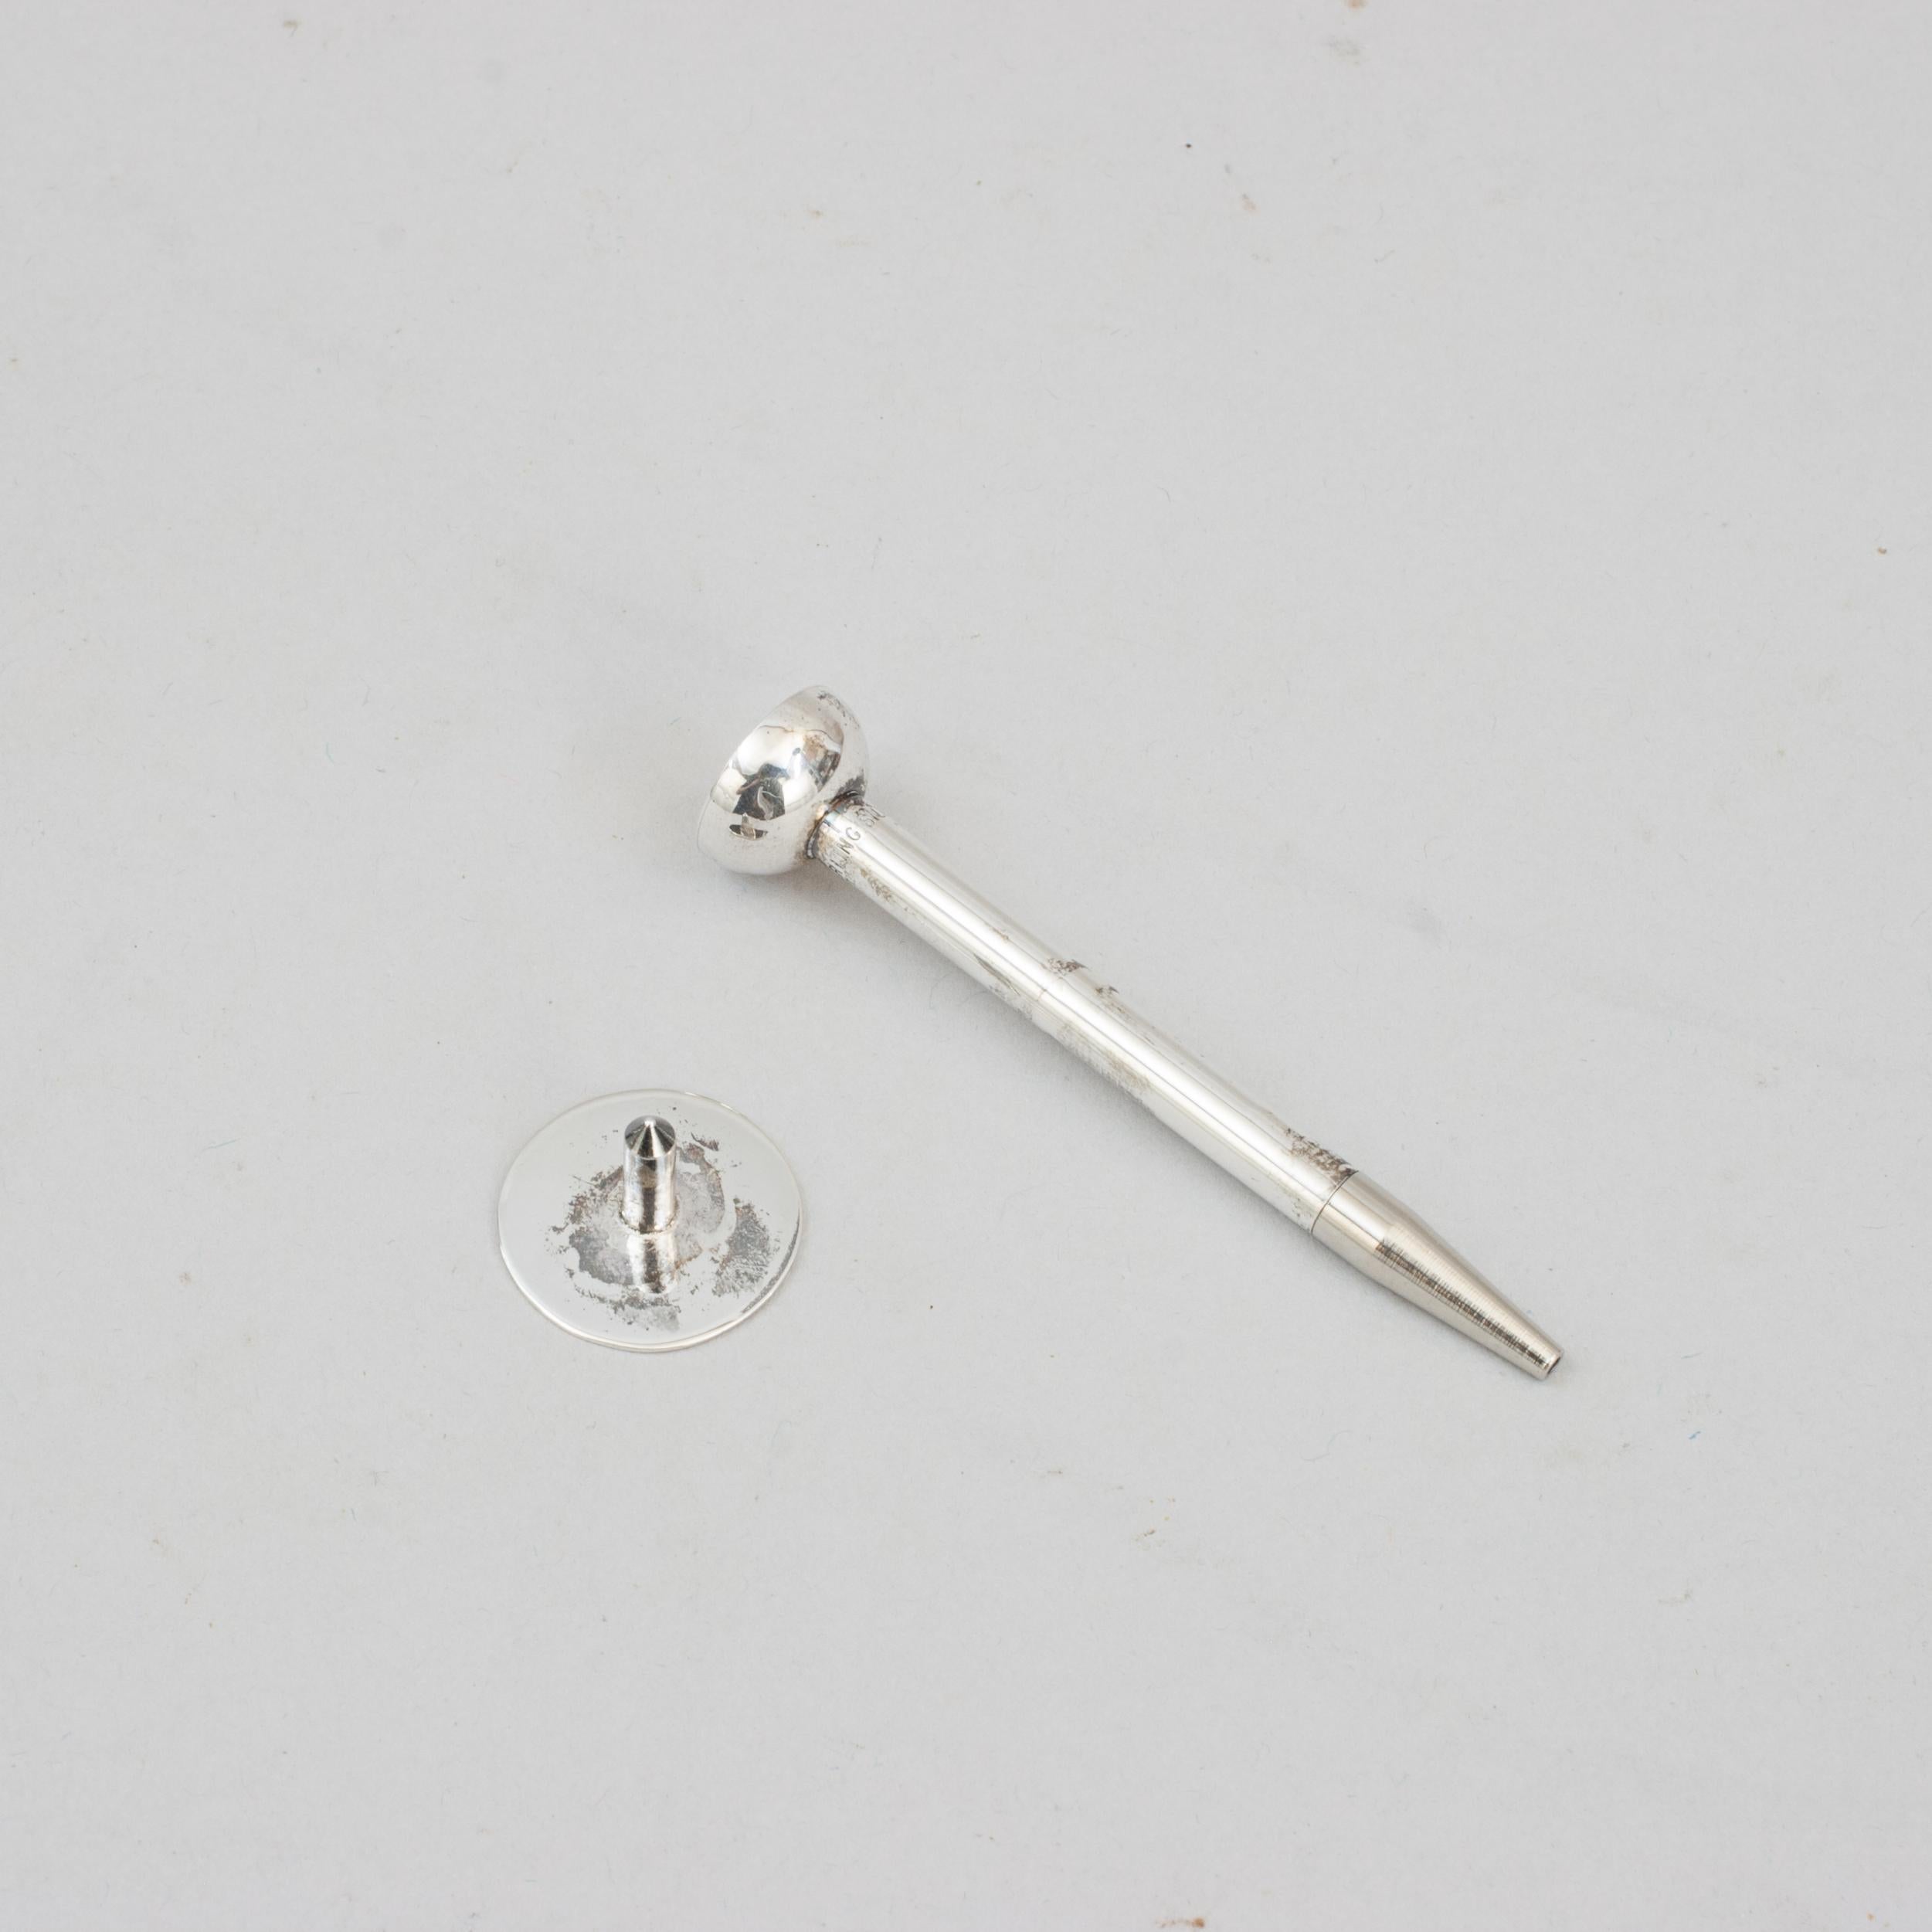 Silver Golf Tee Pencil and Ball Marker For Sale 1